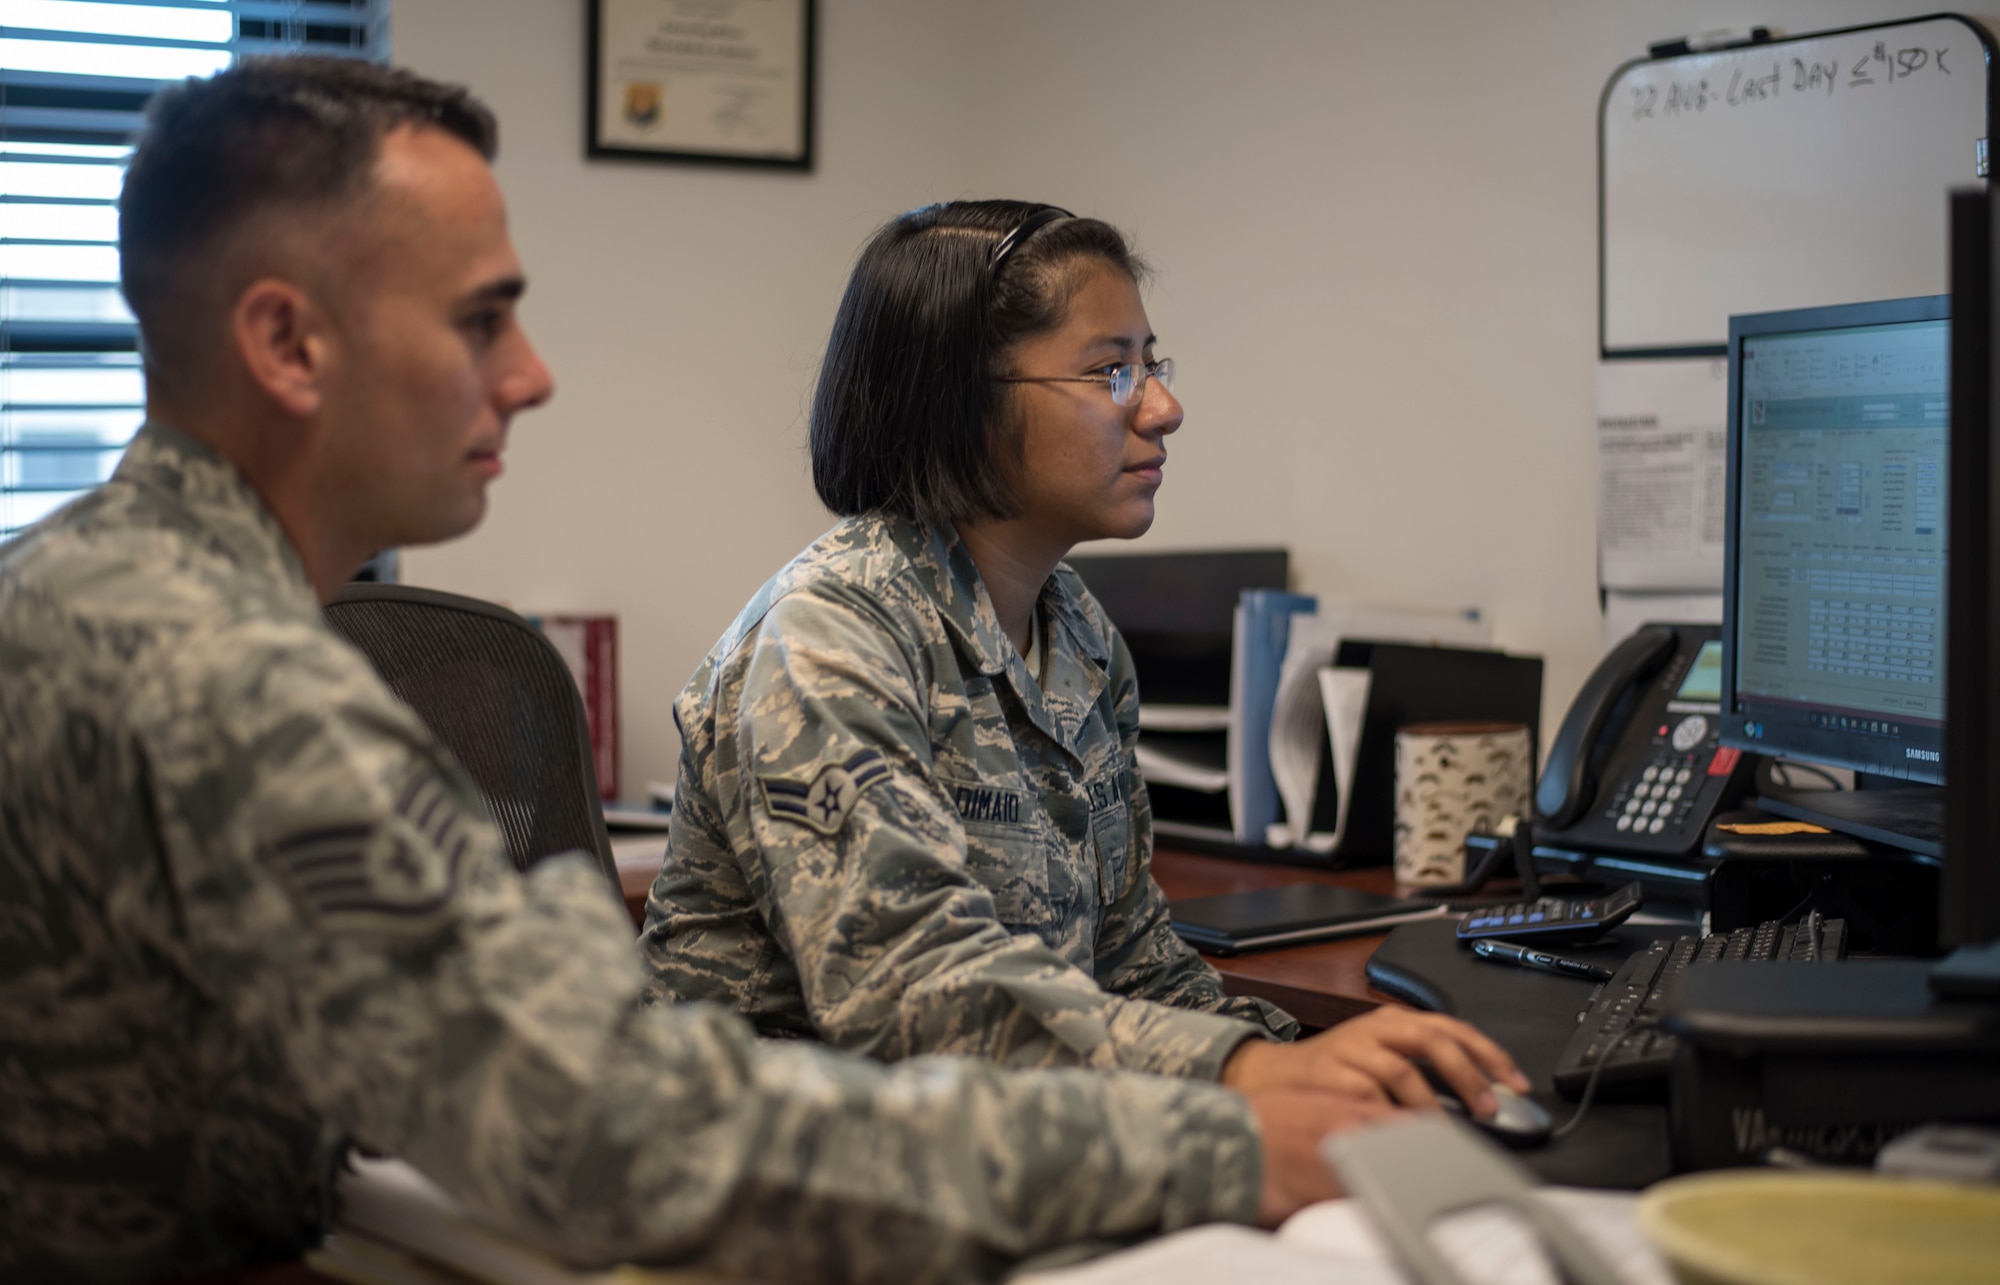 U.S. Air Force Staff Sgt. Blake Martin, a contracting supervisor and Airman 1st Class Gabrielle Dimaio, a contracting specialist, both assigned to the 6th Contracting Squadron (CONS), review a training plan for the new Contracting Information Technology (CON-IT) system at MacDill Air Force Base, Fla., June 20, 2018.